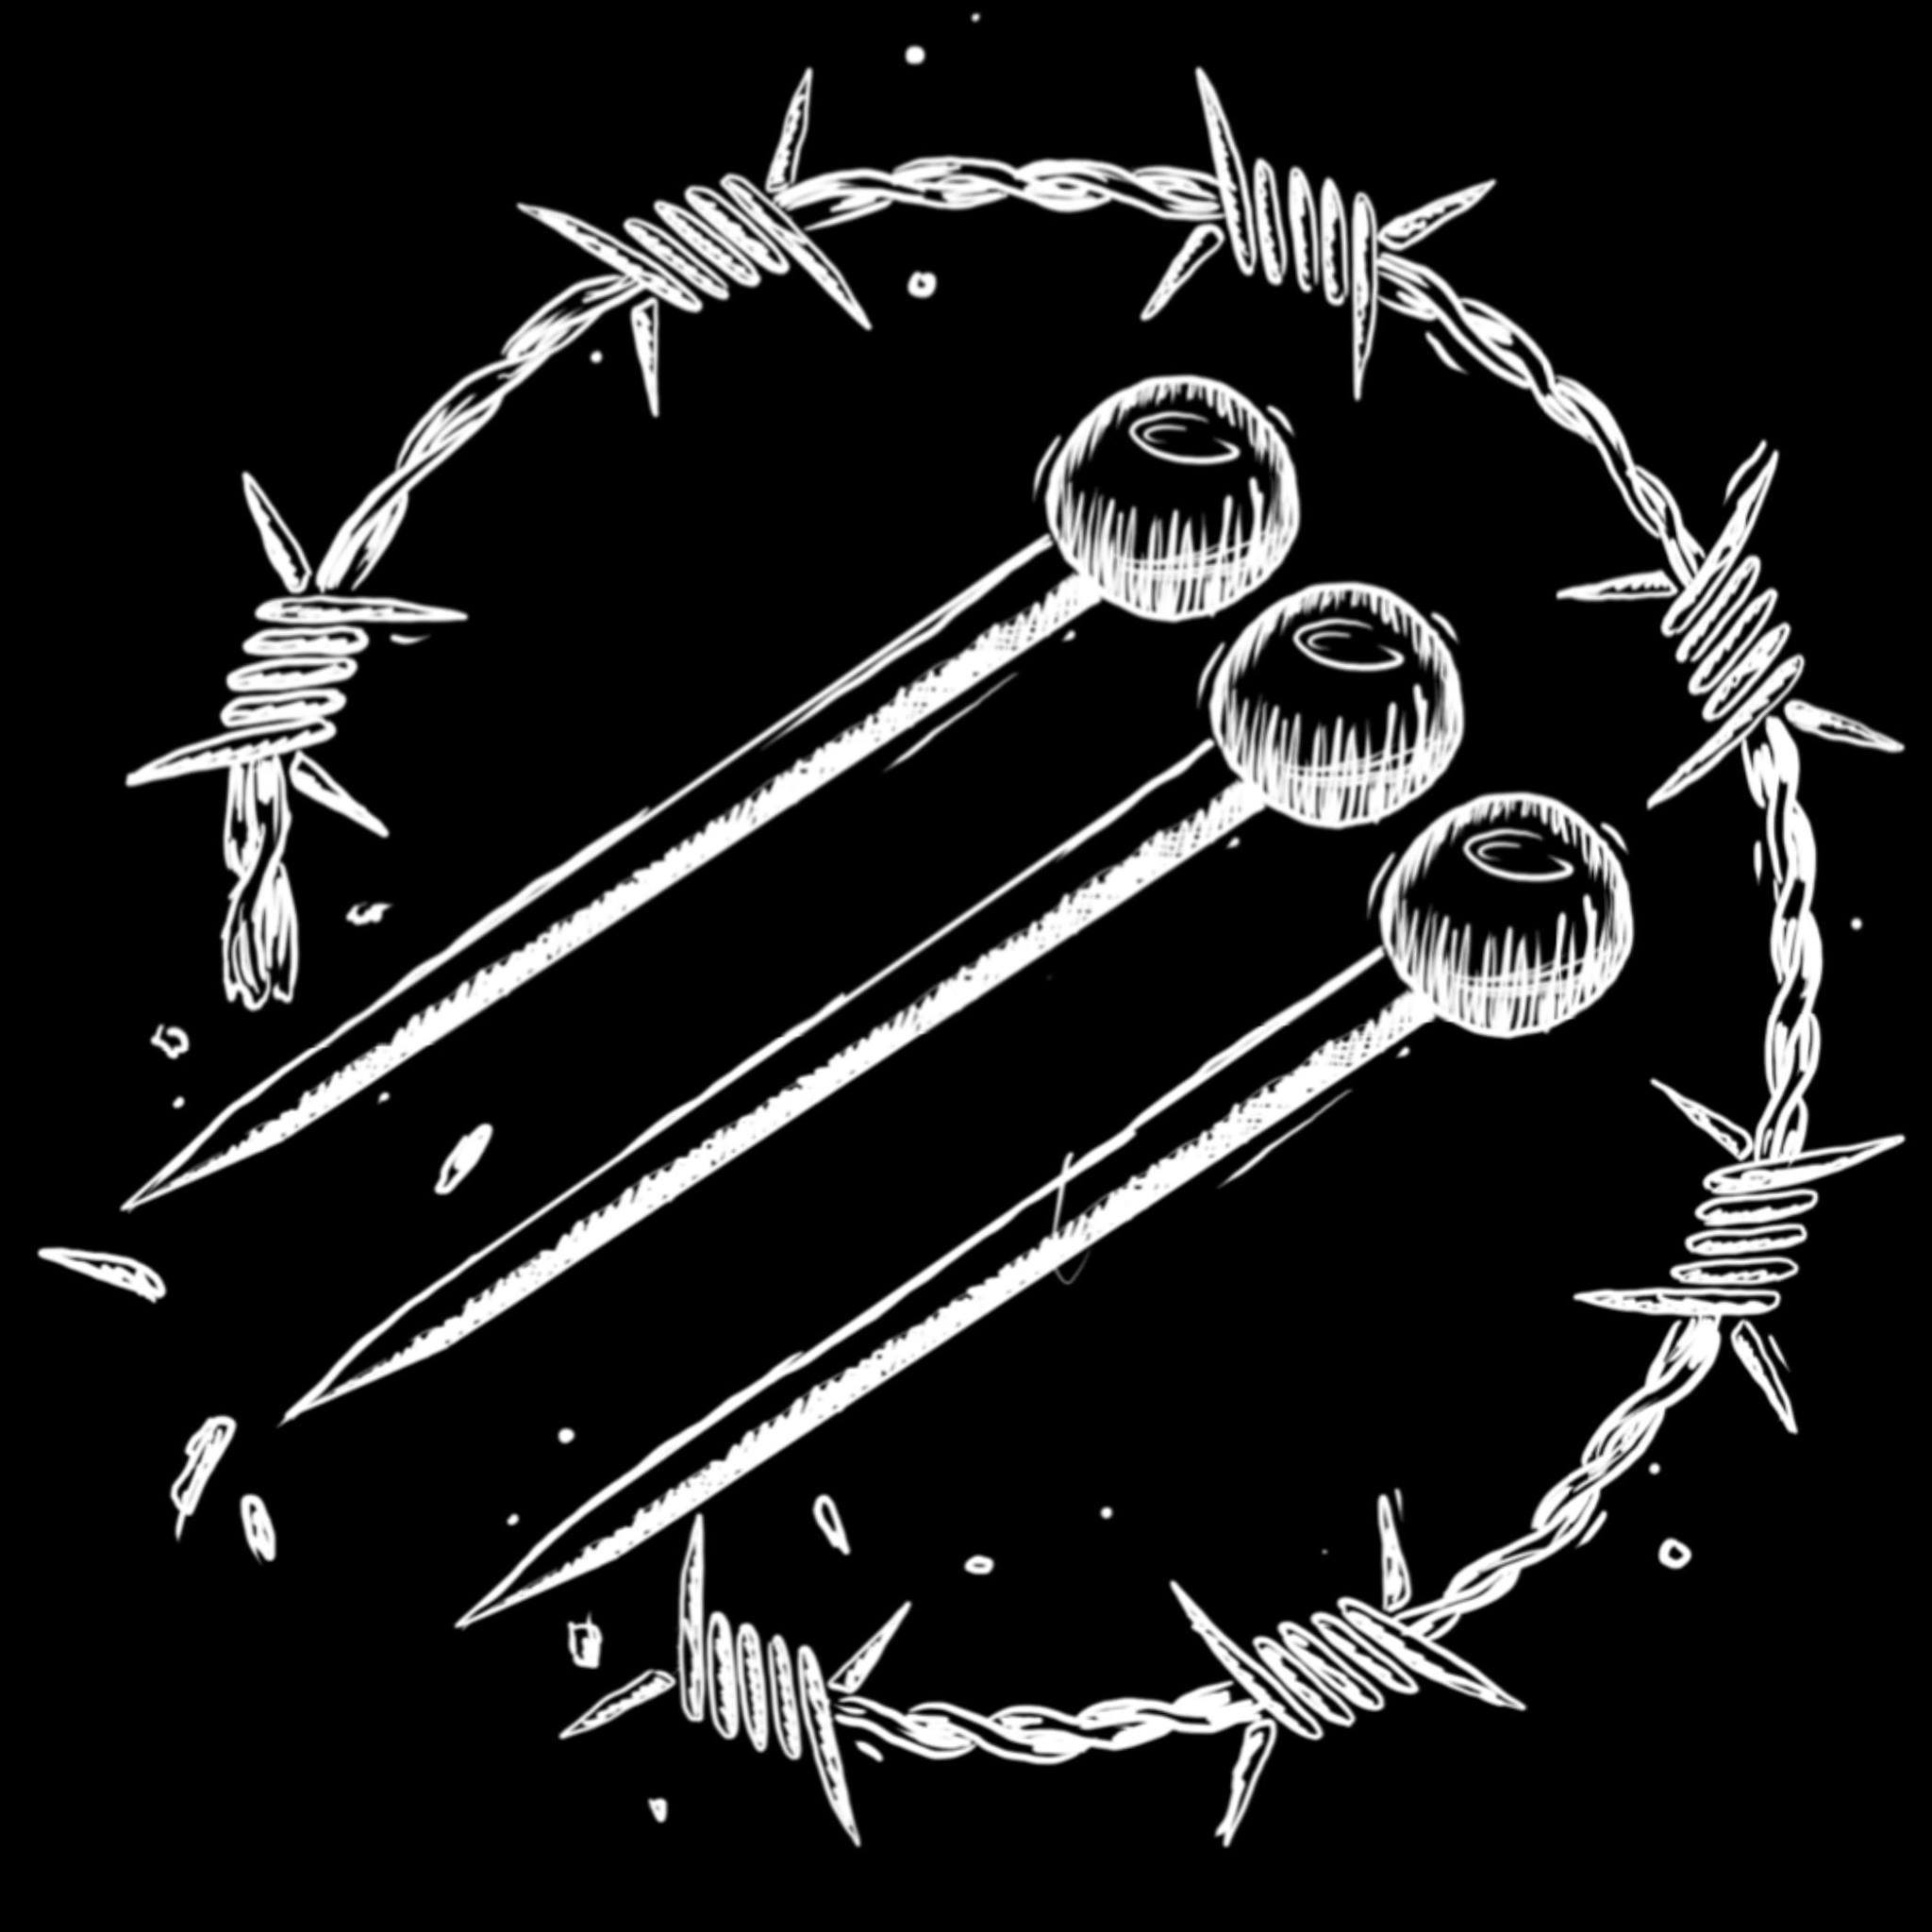 A circular logo in featuring a white screen print style illustration on black background showing three knitting needles pointing down diagonally from top right to left, breaking through a circle of barbed wire